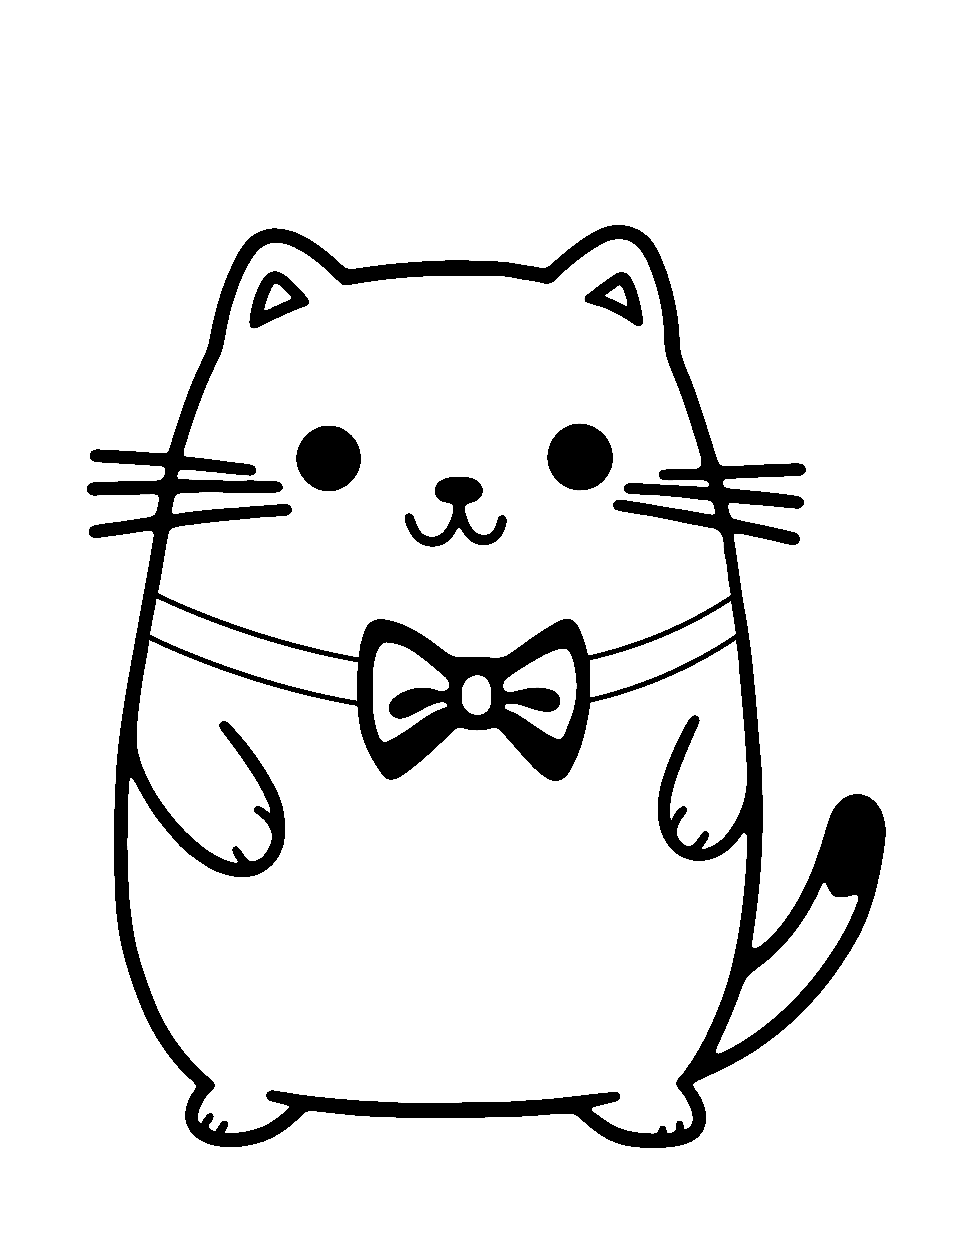 Fancy Pusheen Coloring Page - Pusheen wearing a bow tie, ready for a party.